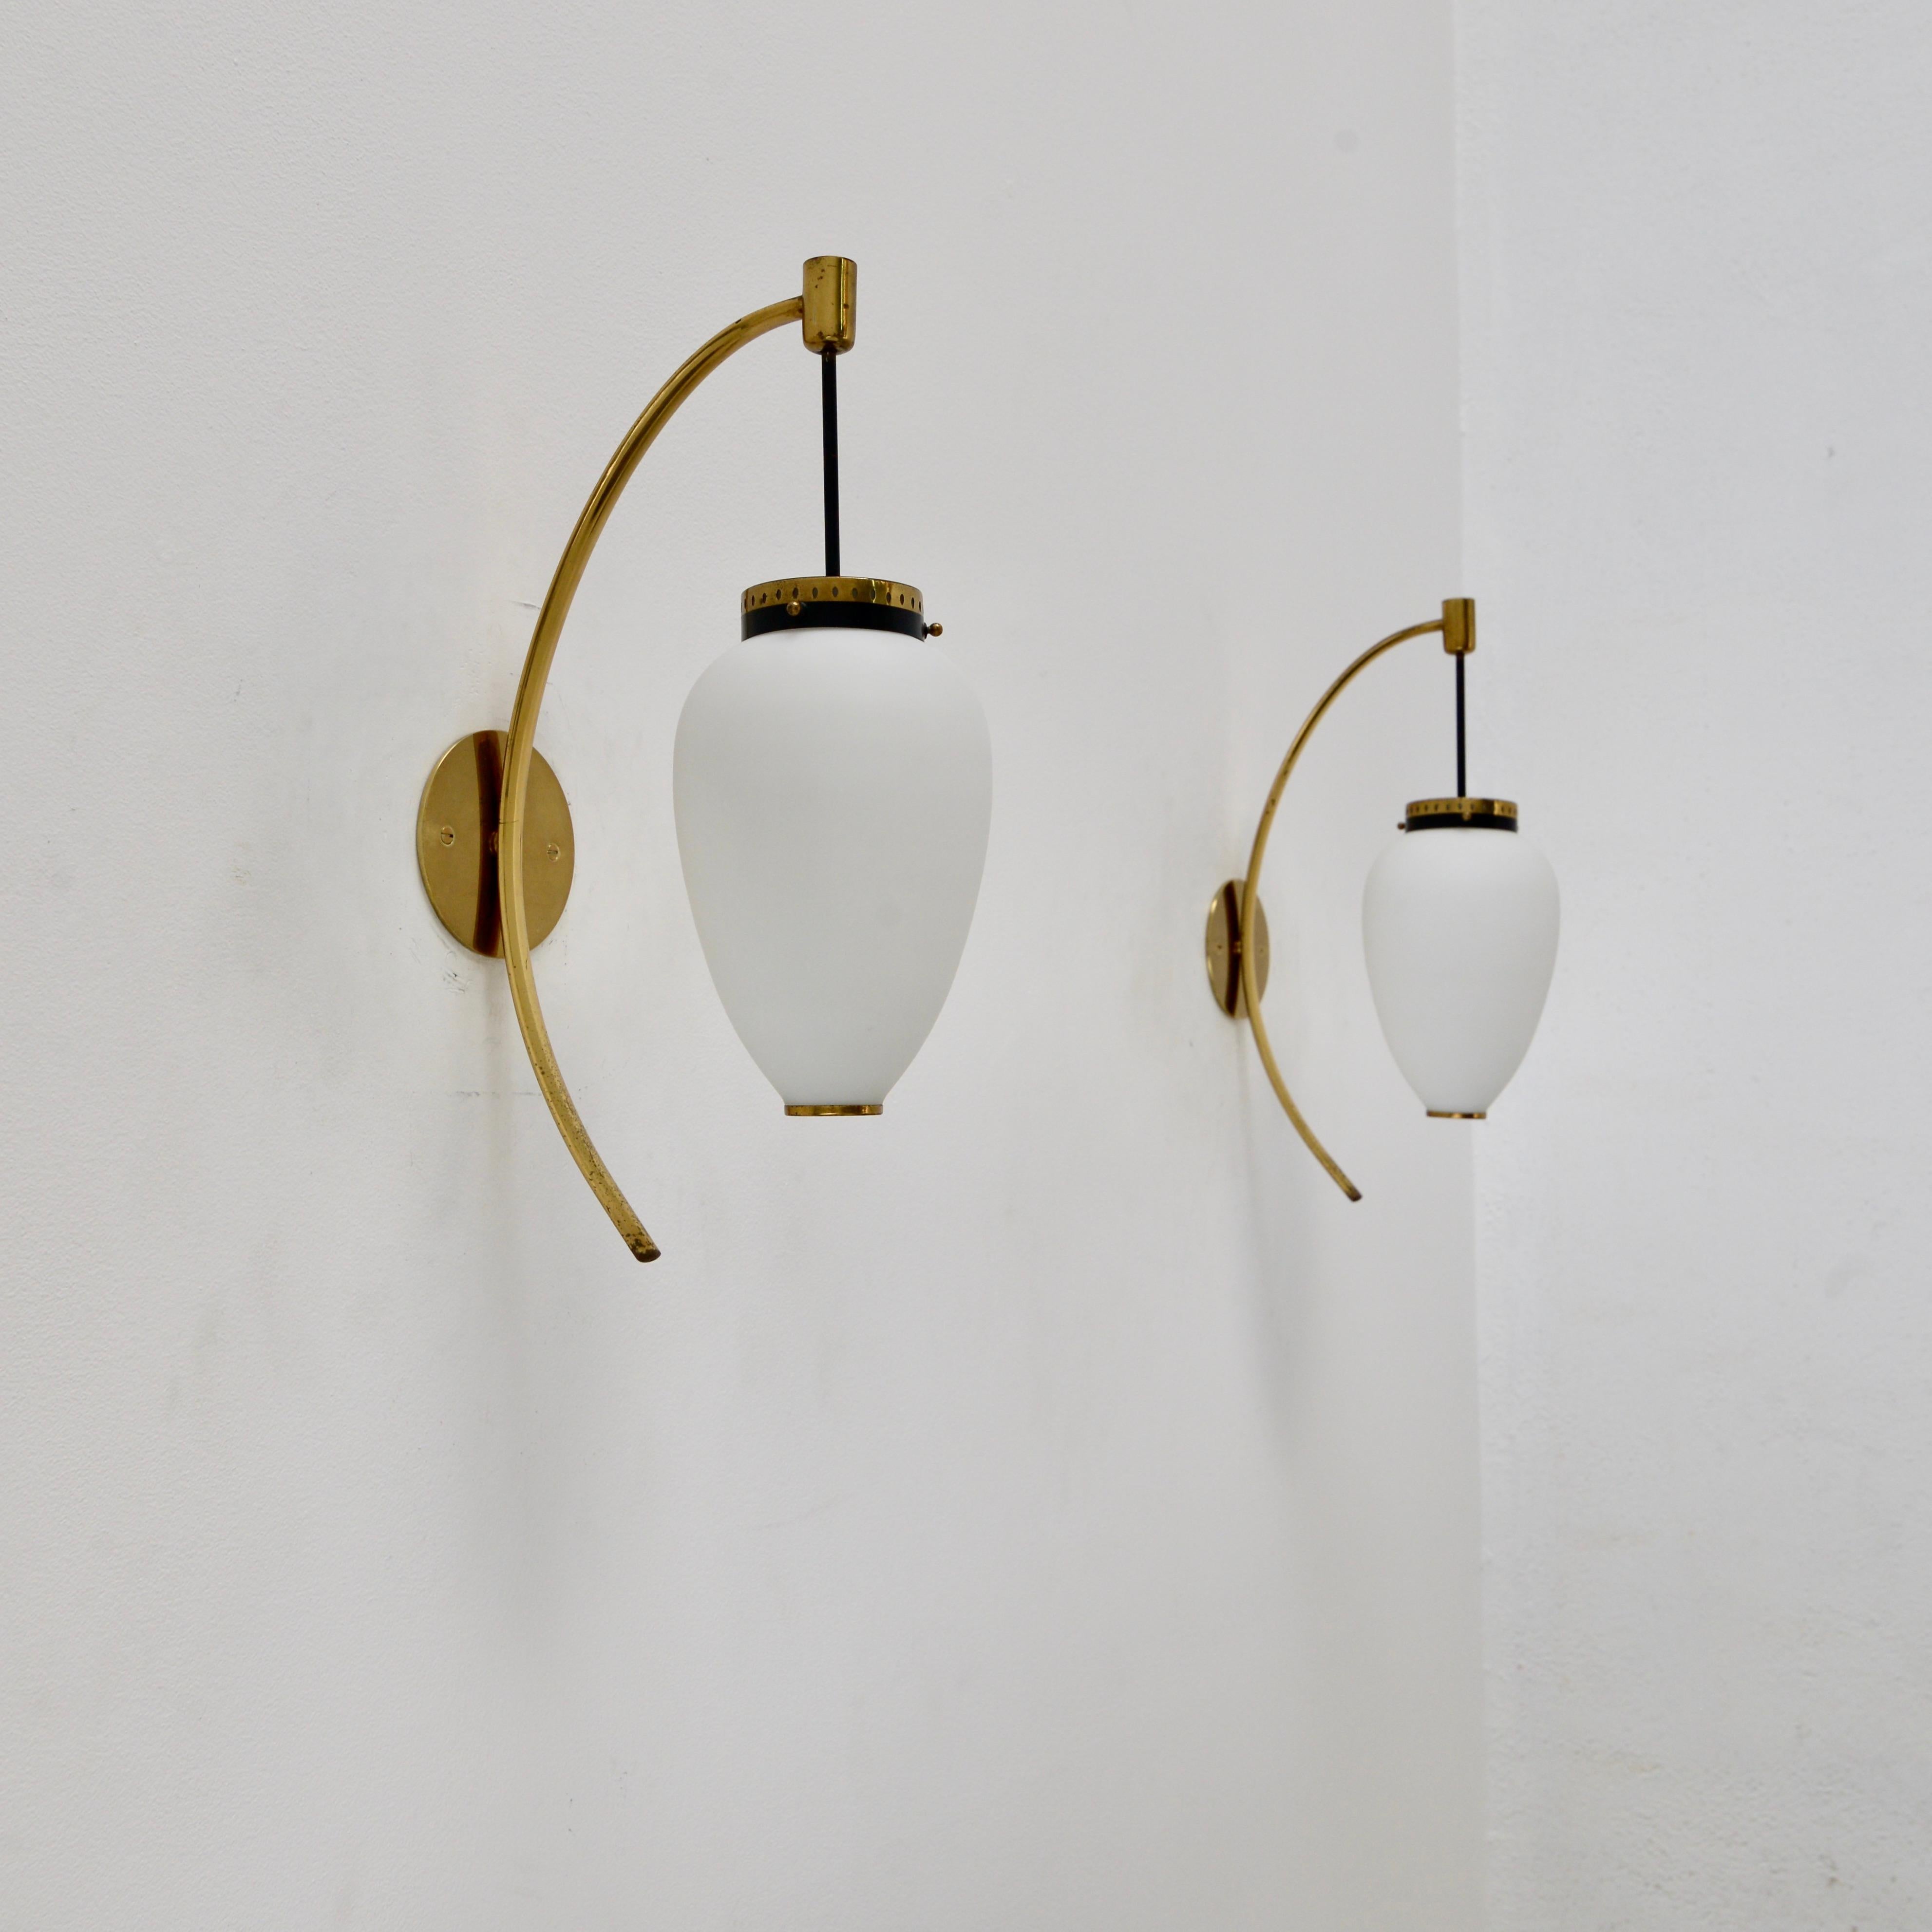 Classical 1950s pair of Large Stilnovo Sconces from Italy. These sconces are naturally aged and partially restored and rewired for use in the US with a single E12 candelabra based socket per sconce. Priced individually. Lightbulbs included with